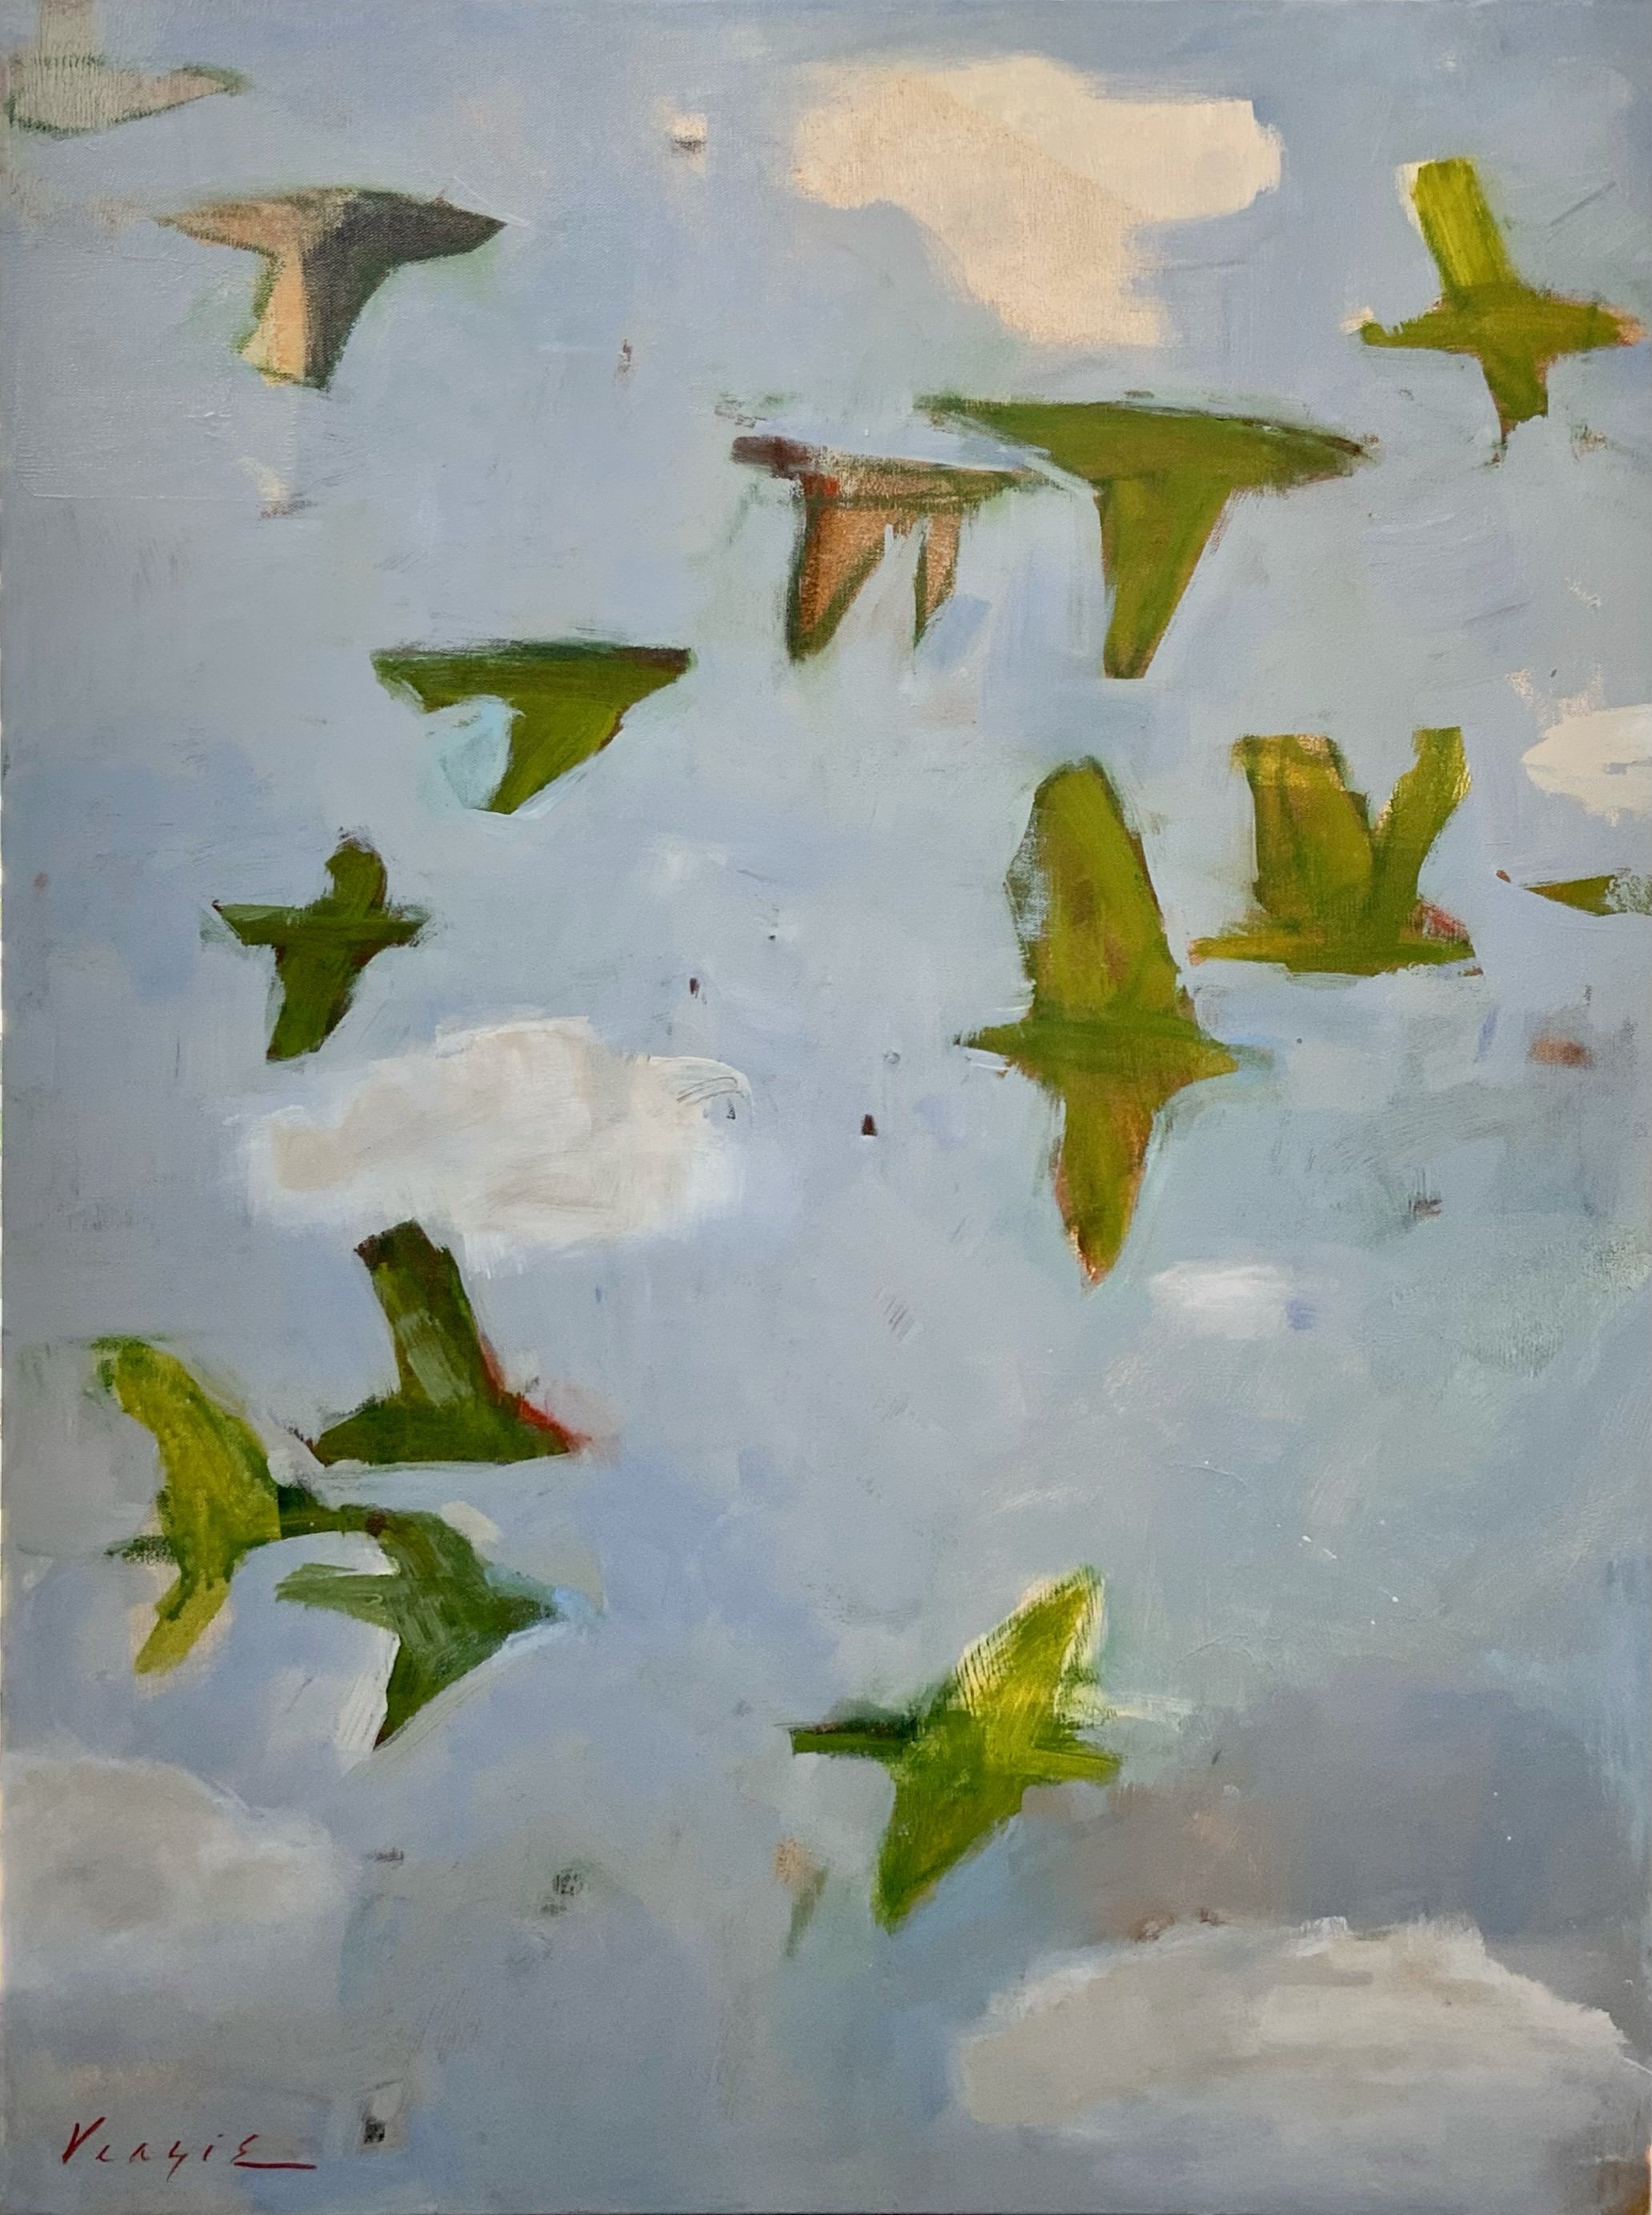 Come Fly With Me, 40" x 30", by Mary Veazie